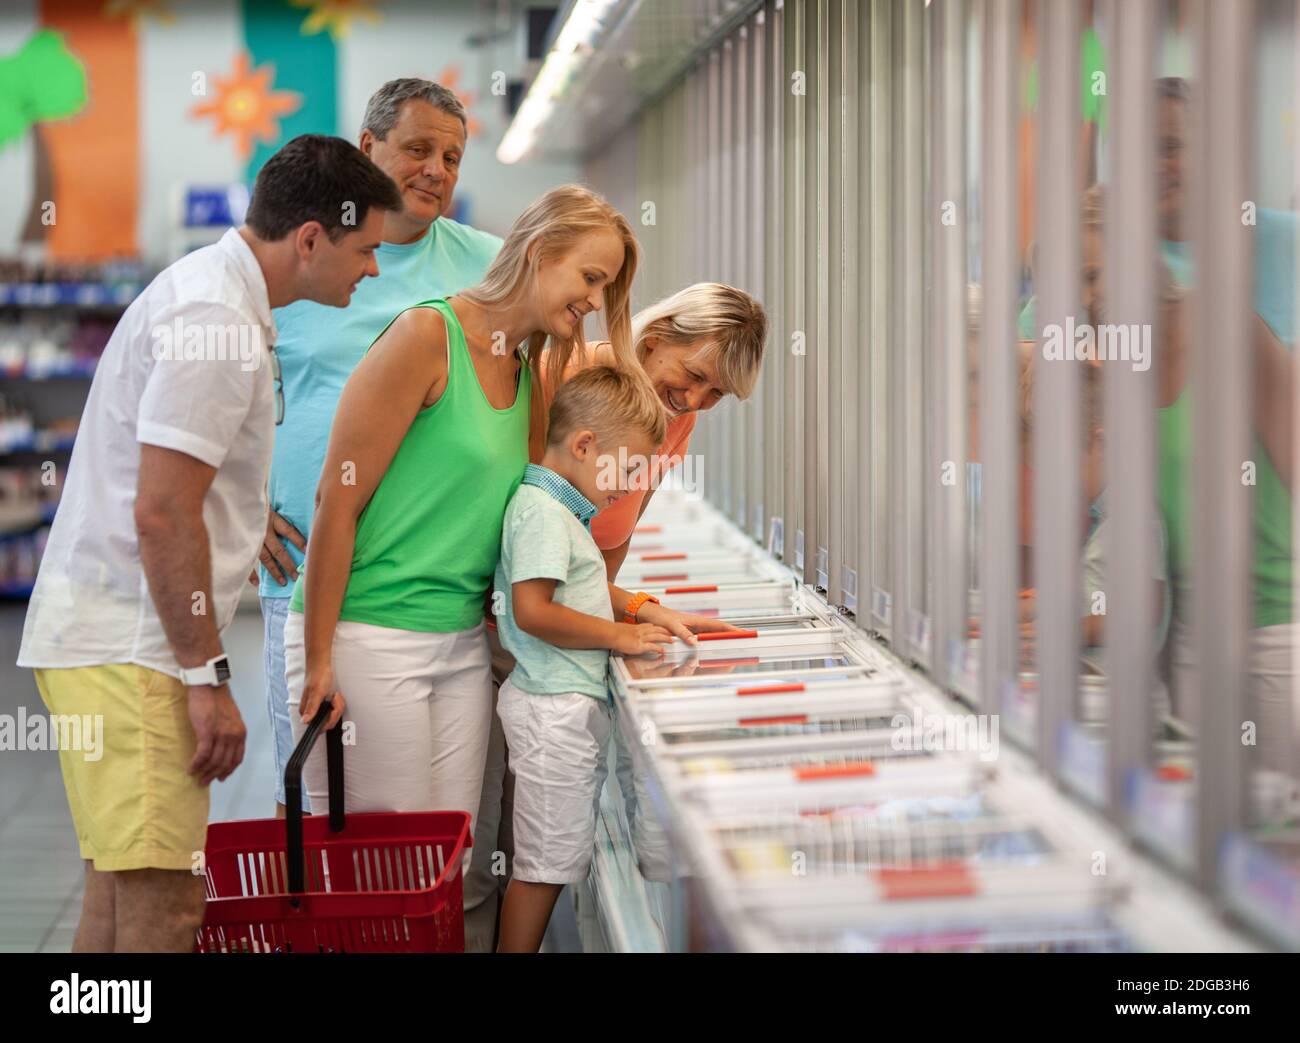 A family in a store Stock Photo